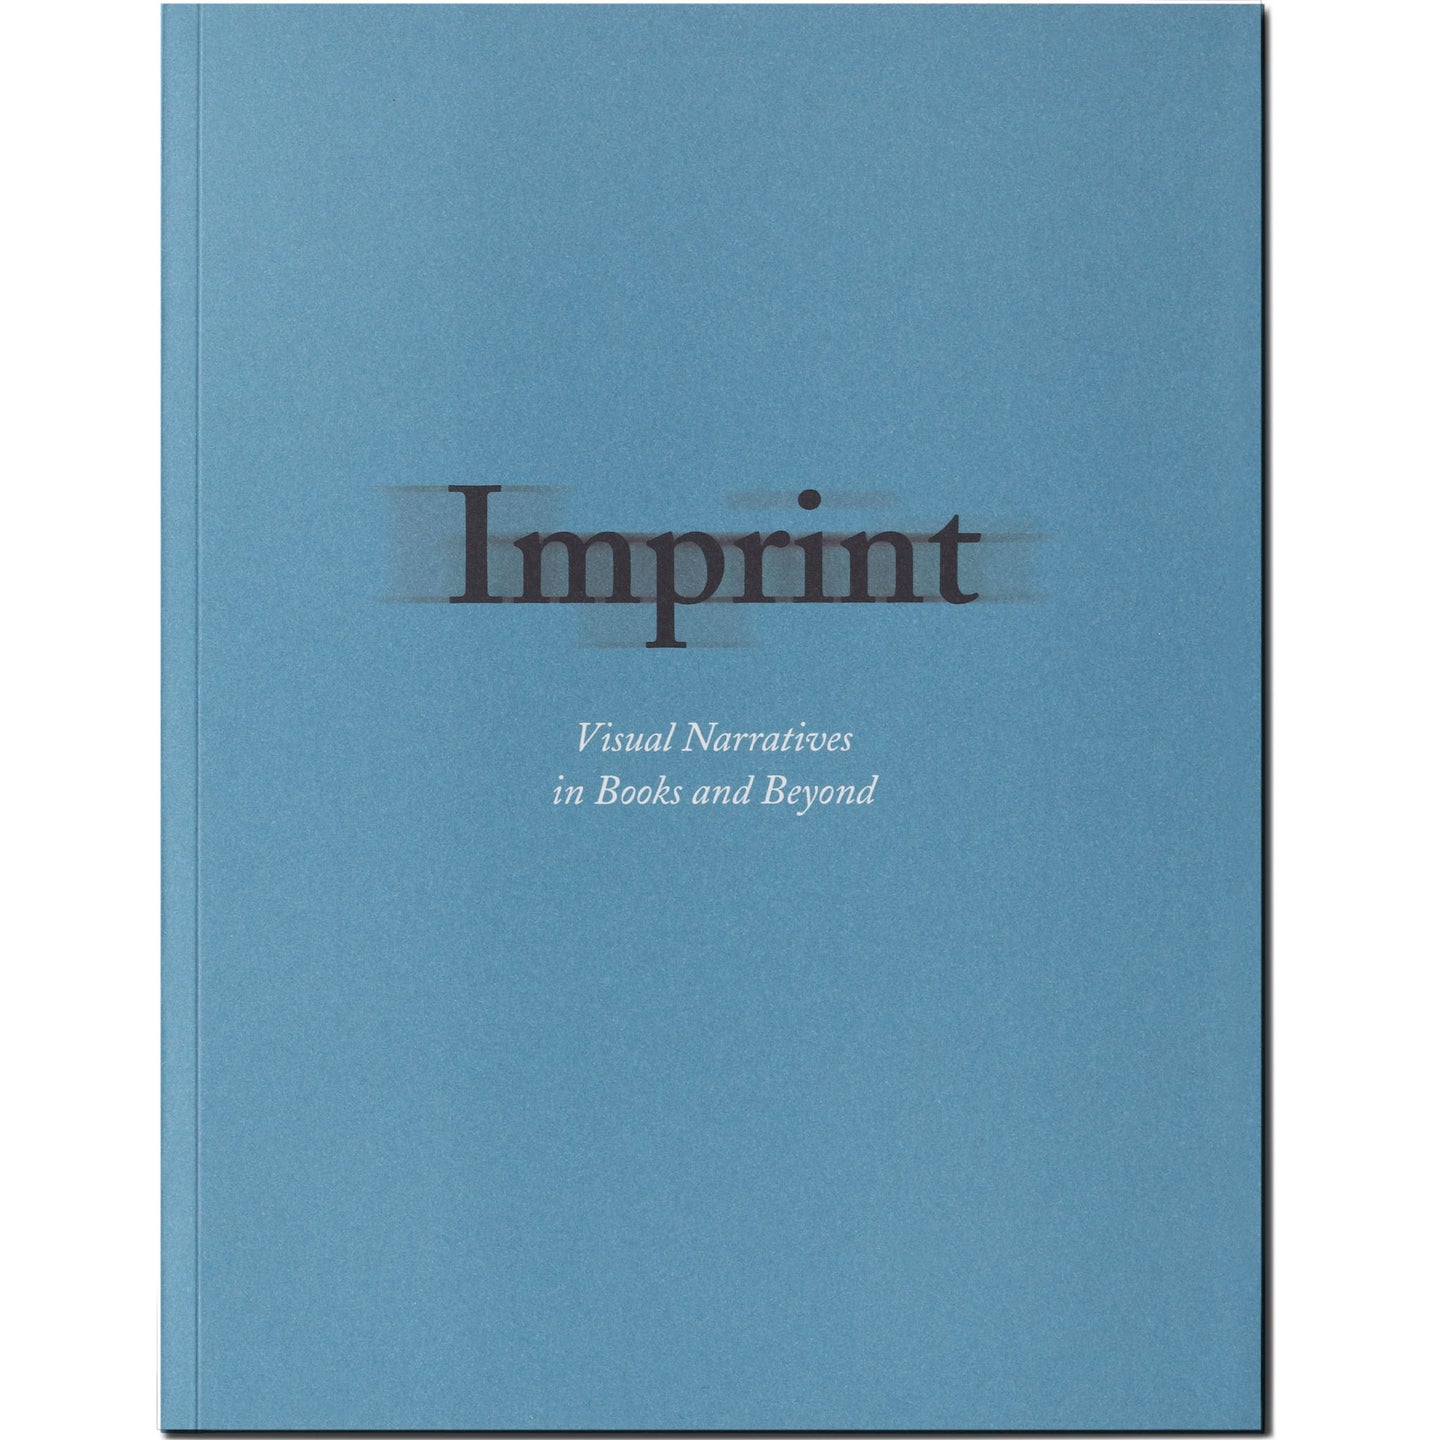 IMPRINT: VISUAL NARRATIVES IN BOOKS AND BEYOND